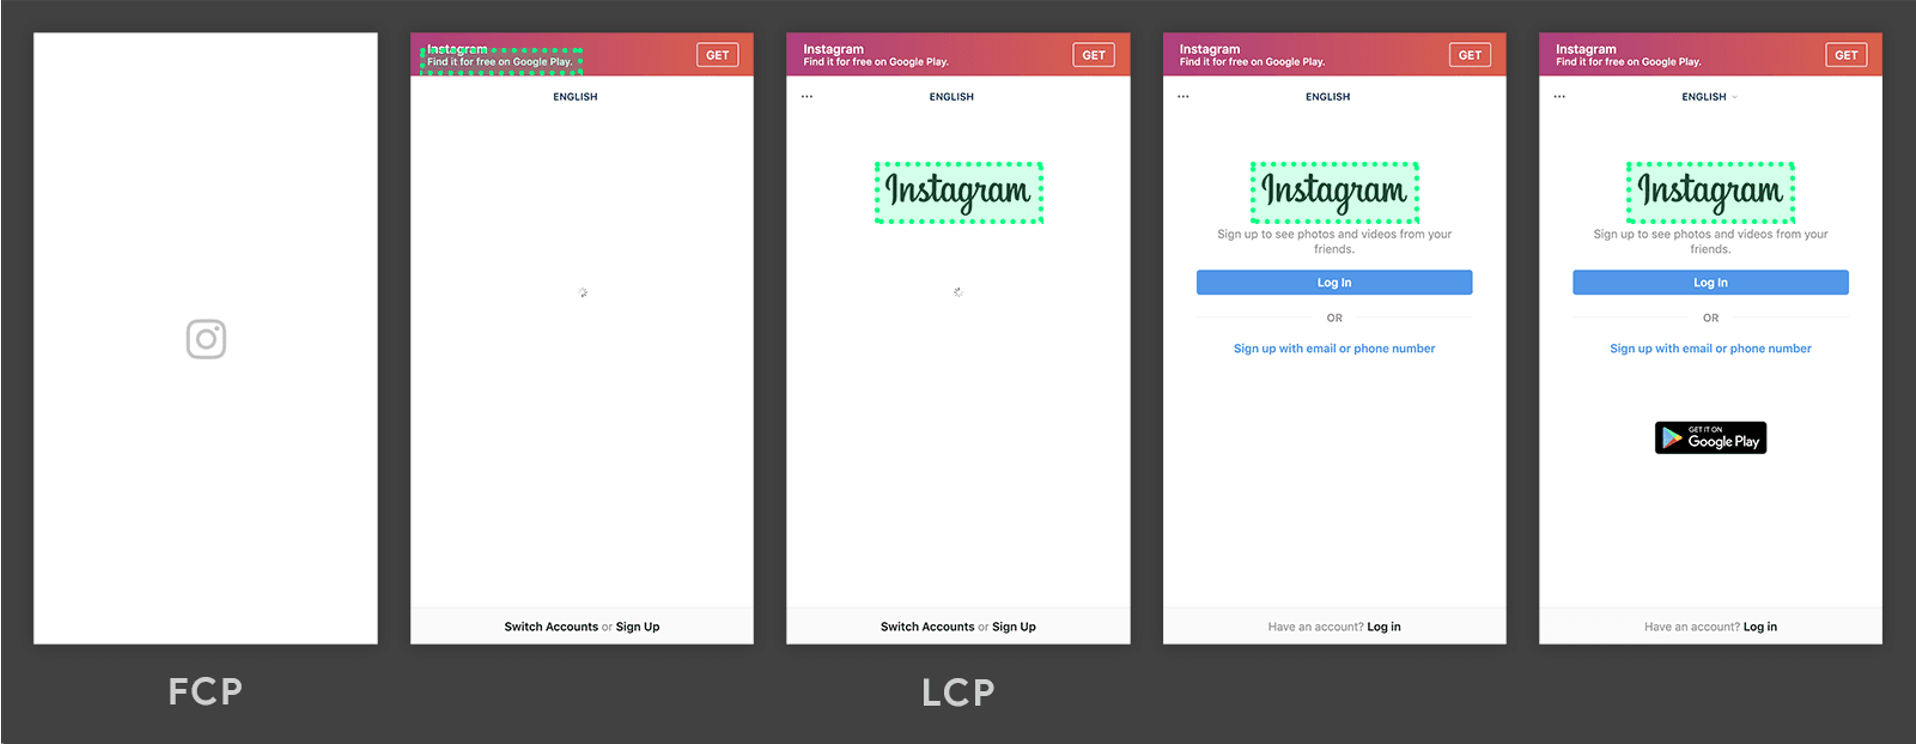 Instagram LCP example